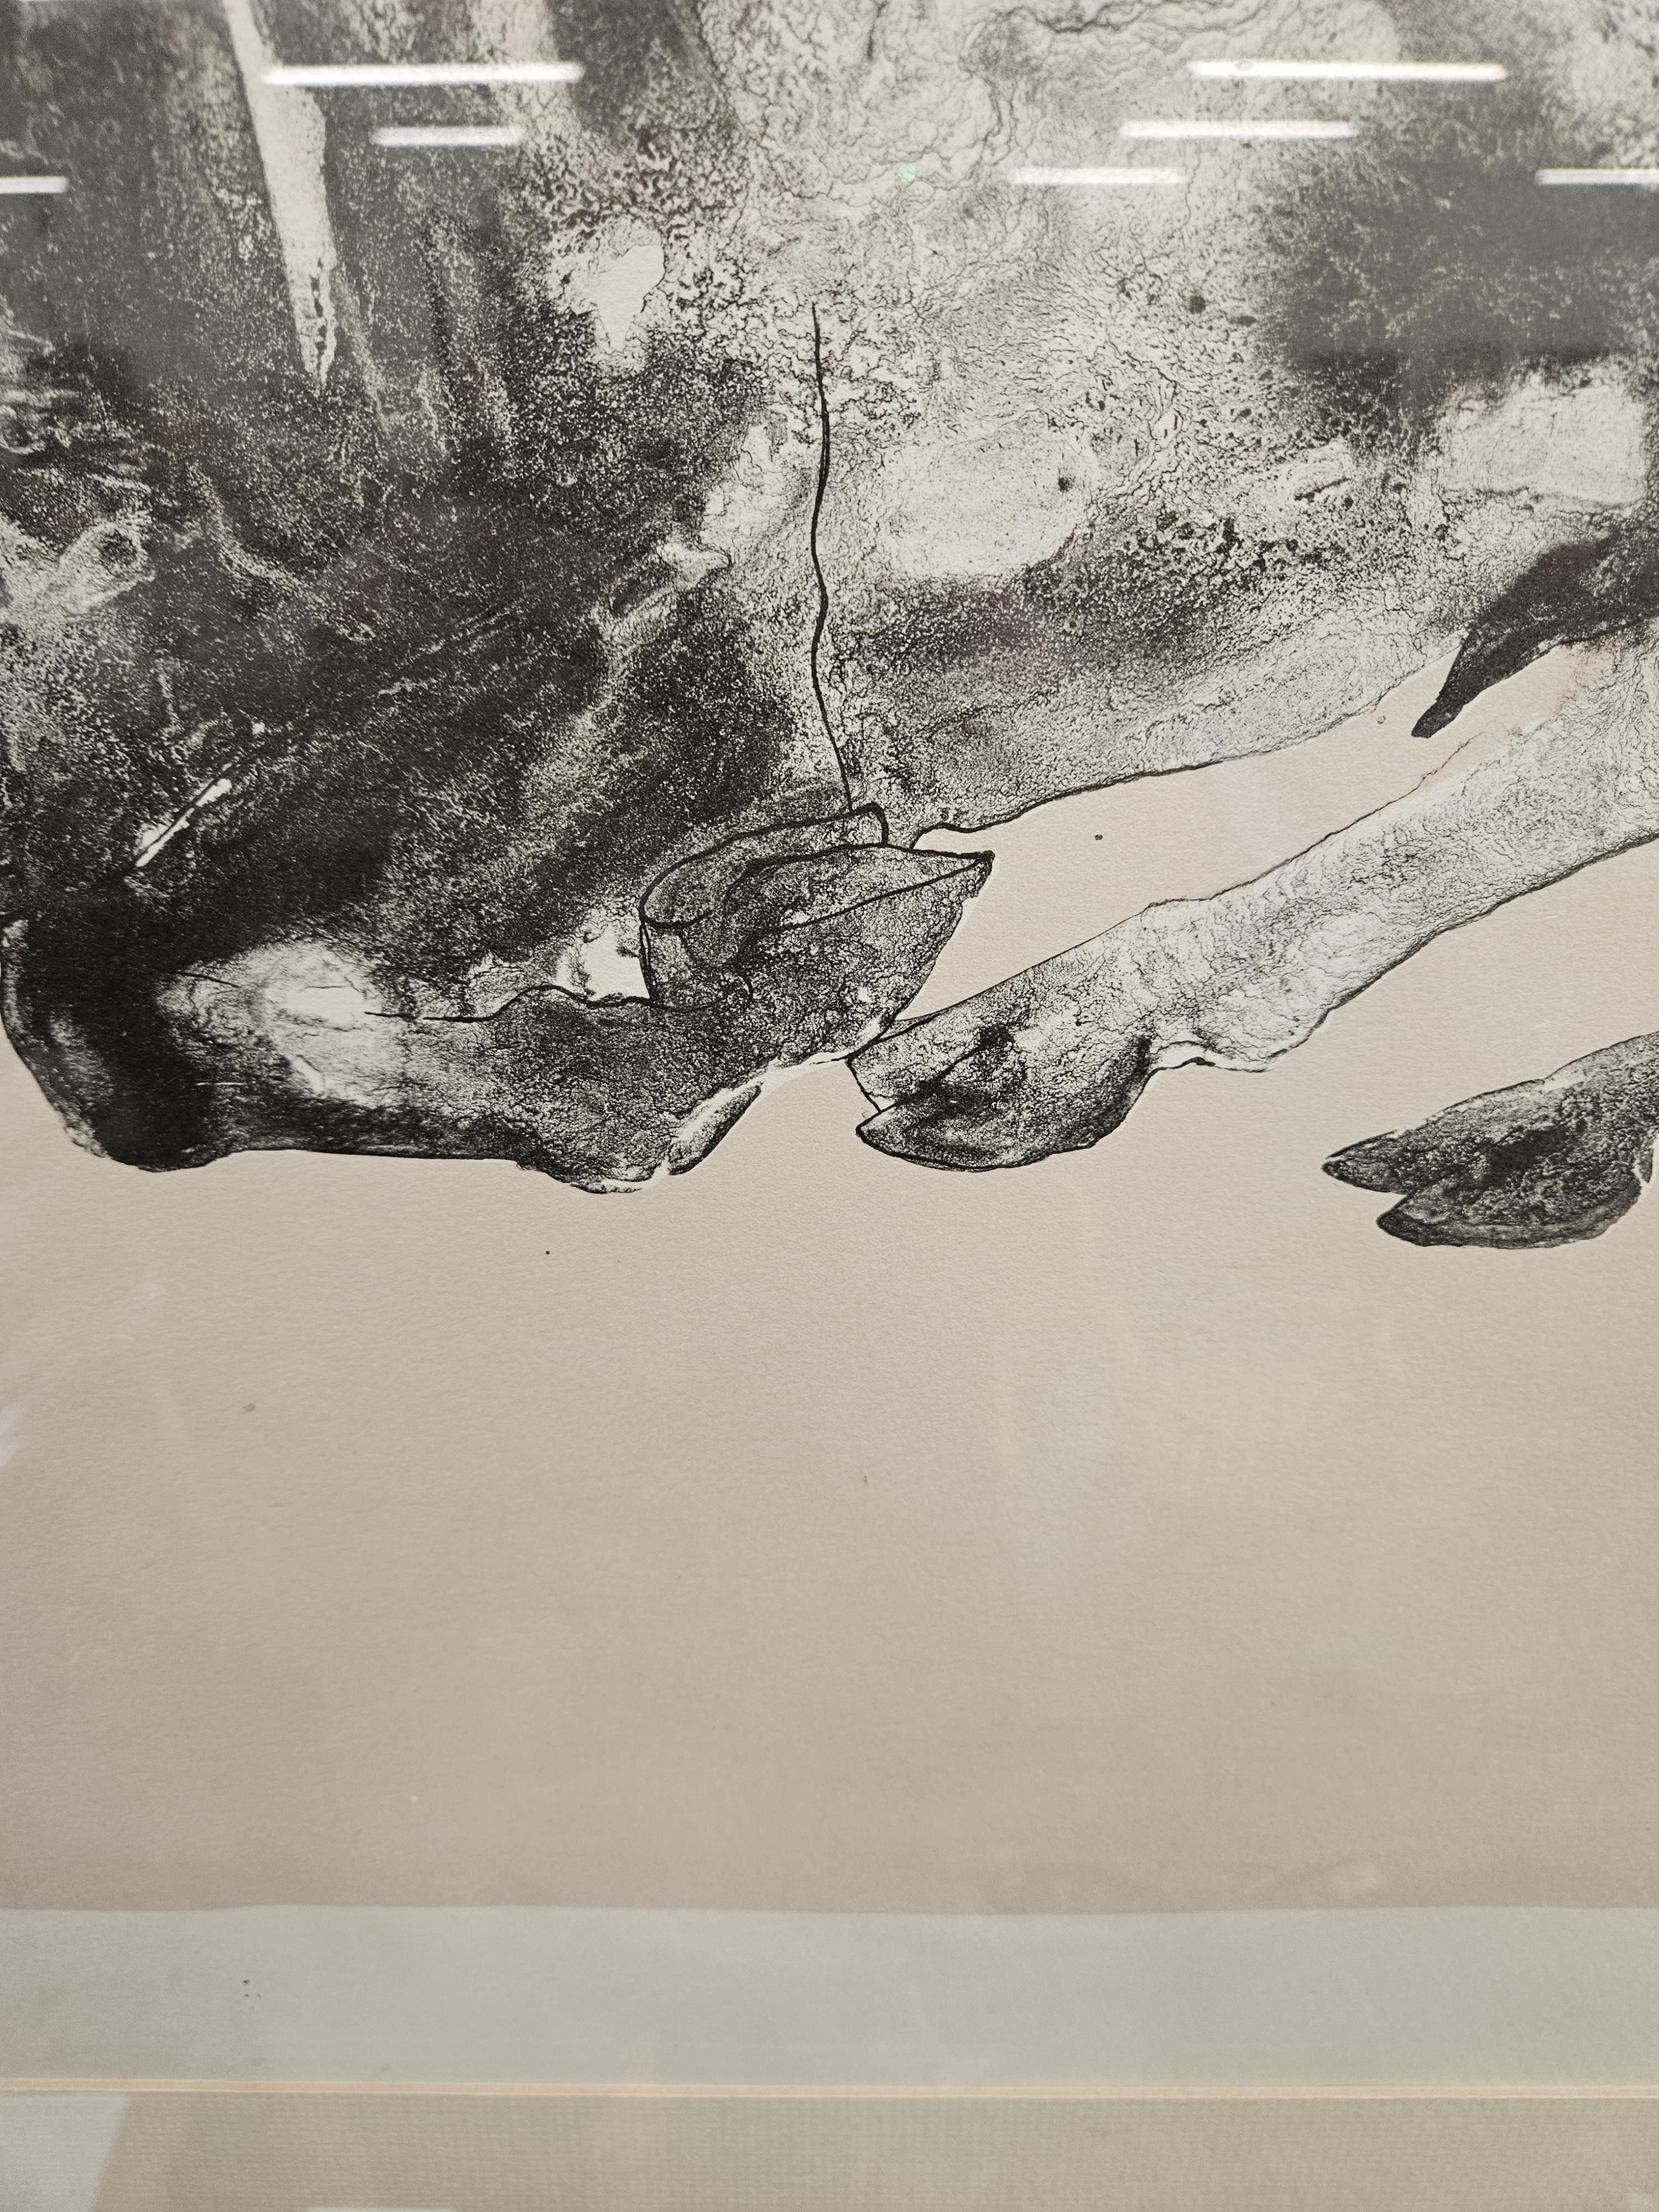 ELISABETH FRINK (1930-1993) ARR, CORRIDA FIVE, 1973, SIGNED IN PENCIL AND NUMBERED 32/72, 77x - Image 14 of 19